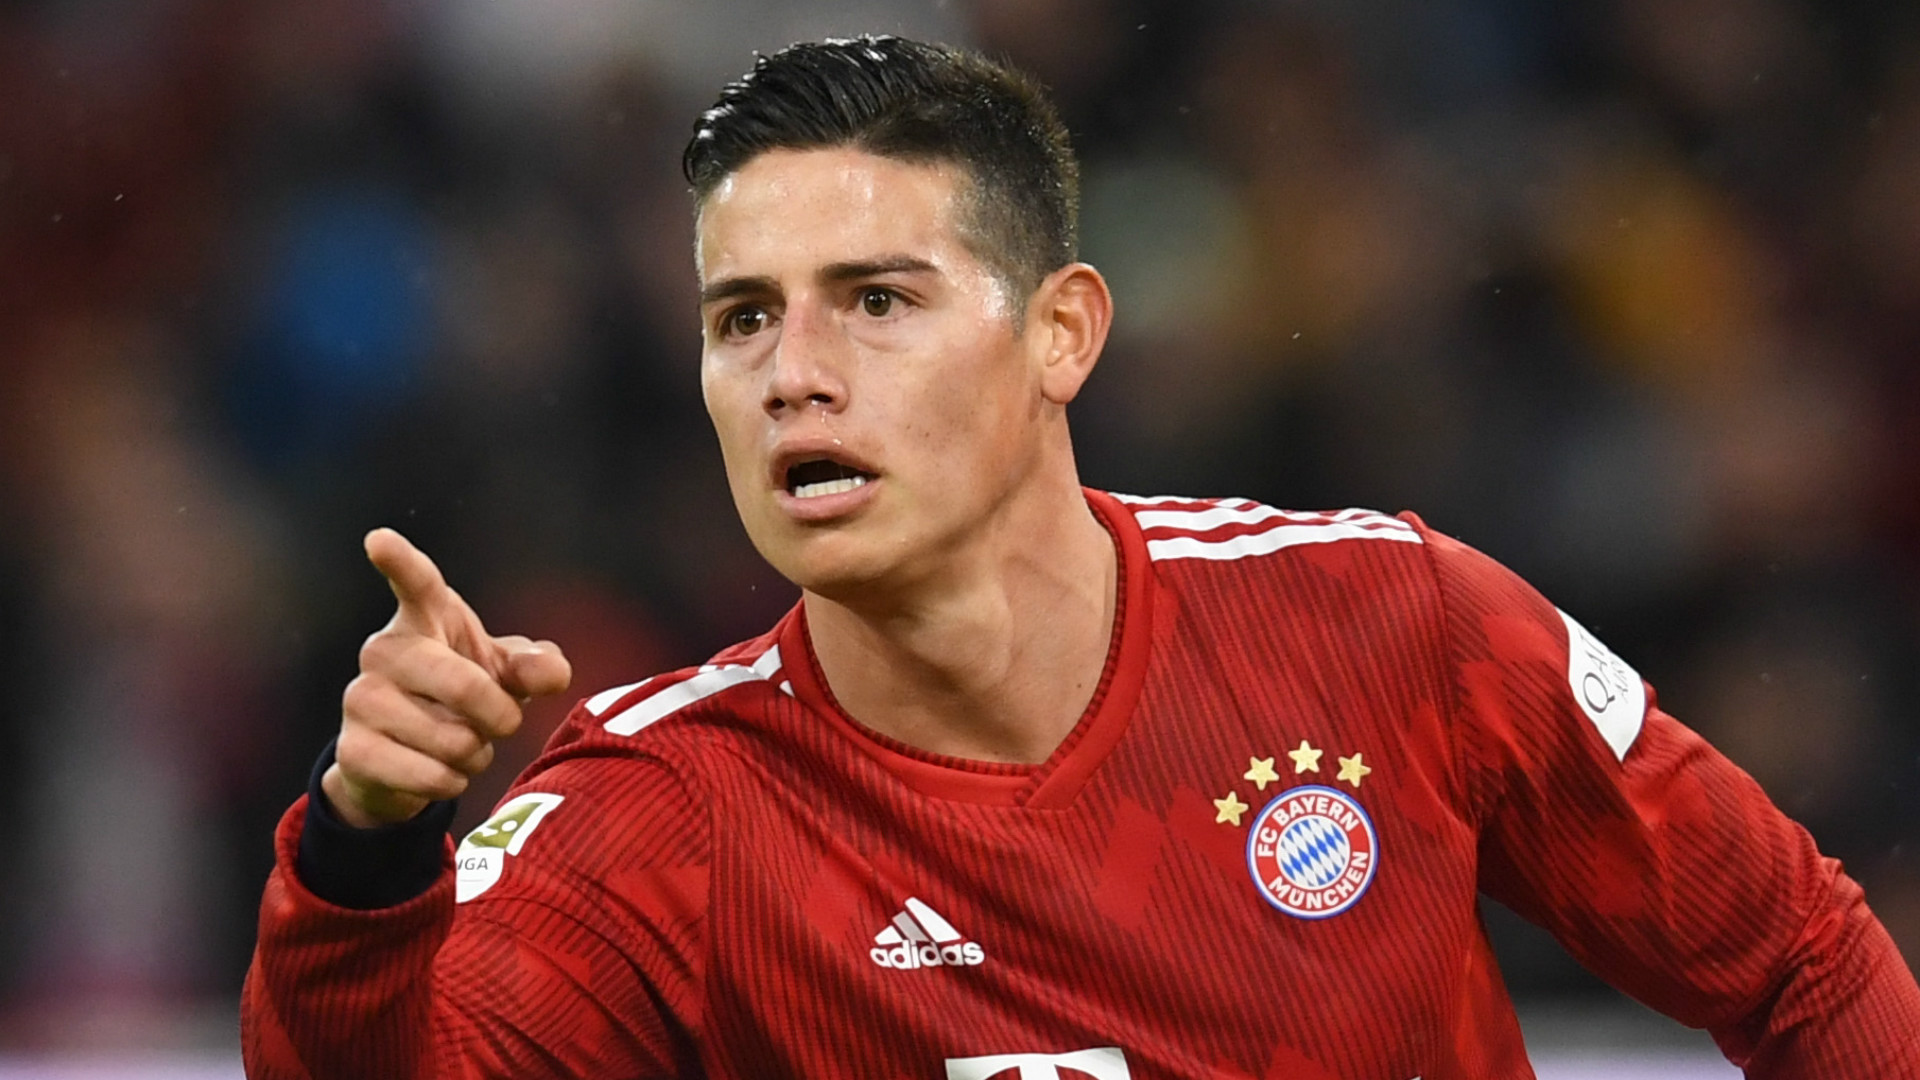 From World Cup superstar to Bayern afterthought - why does nobody want